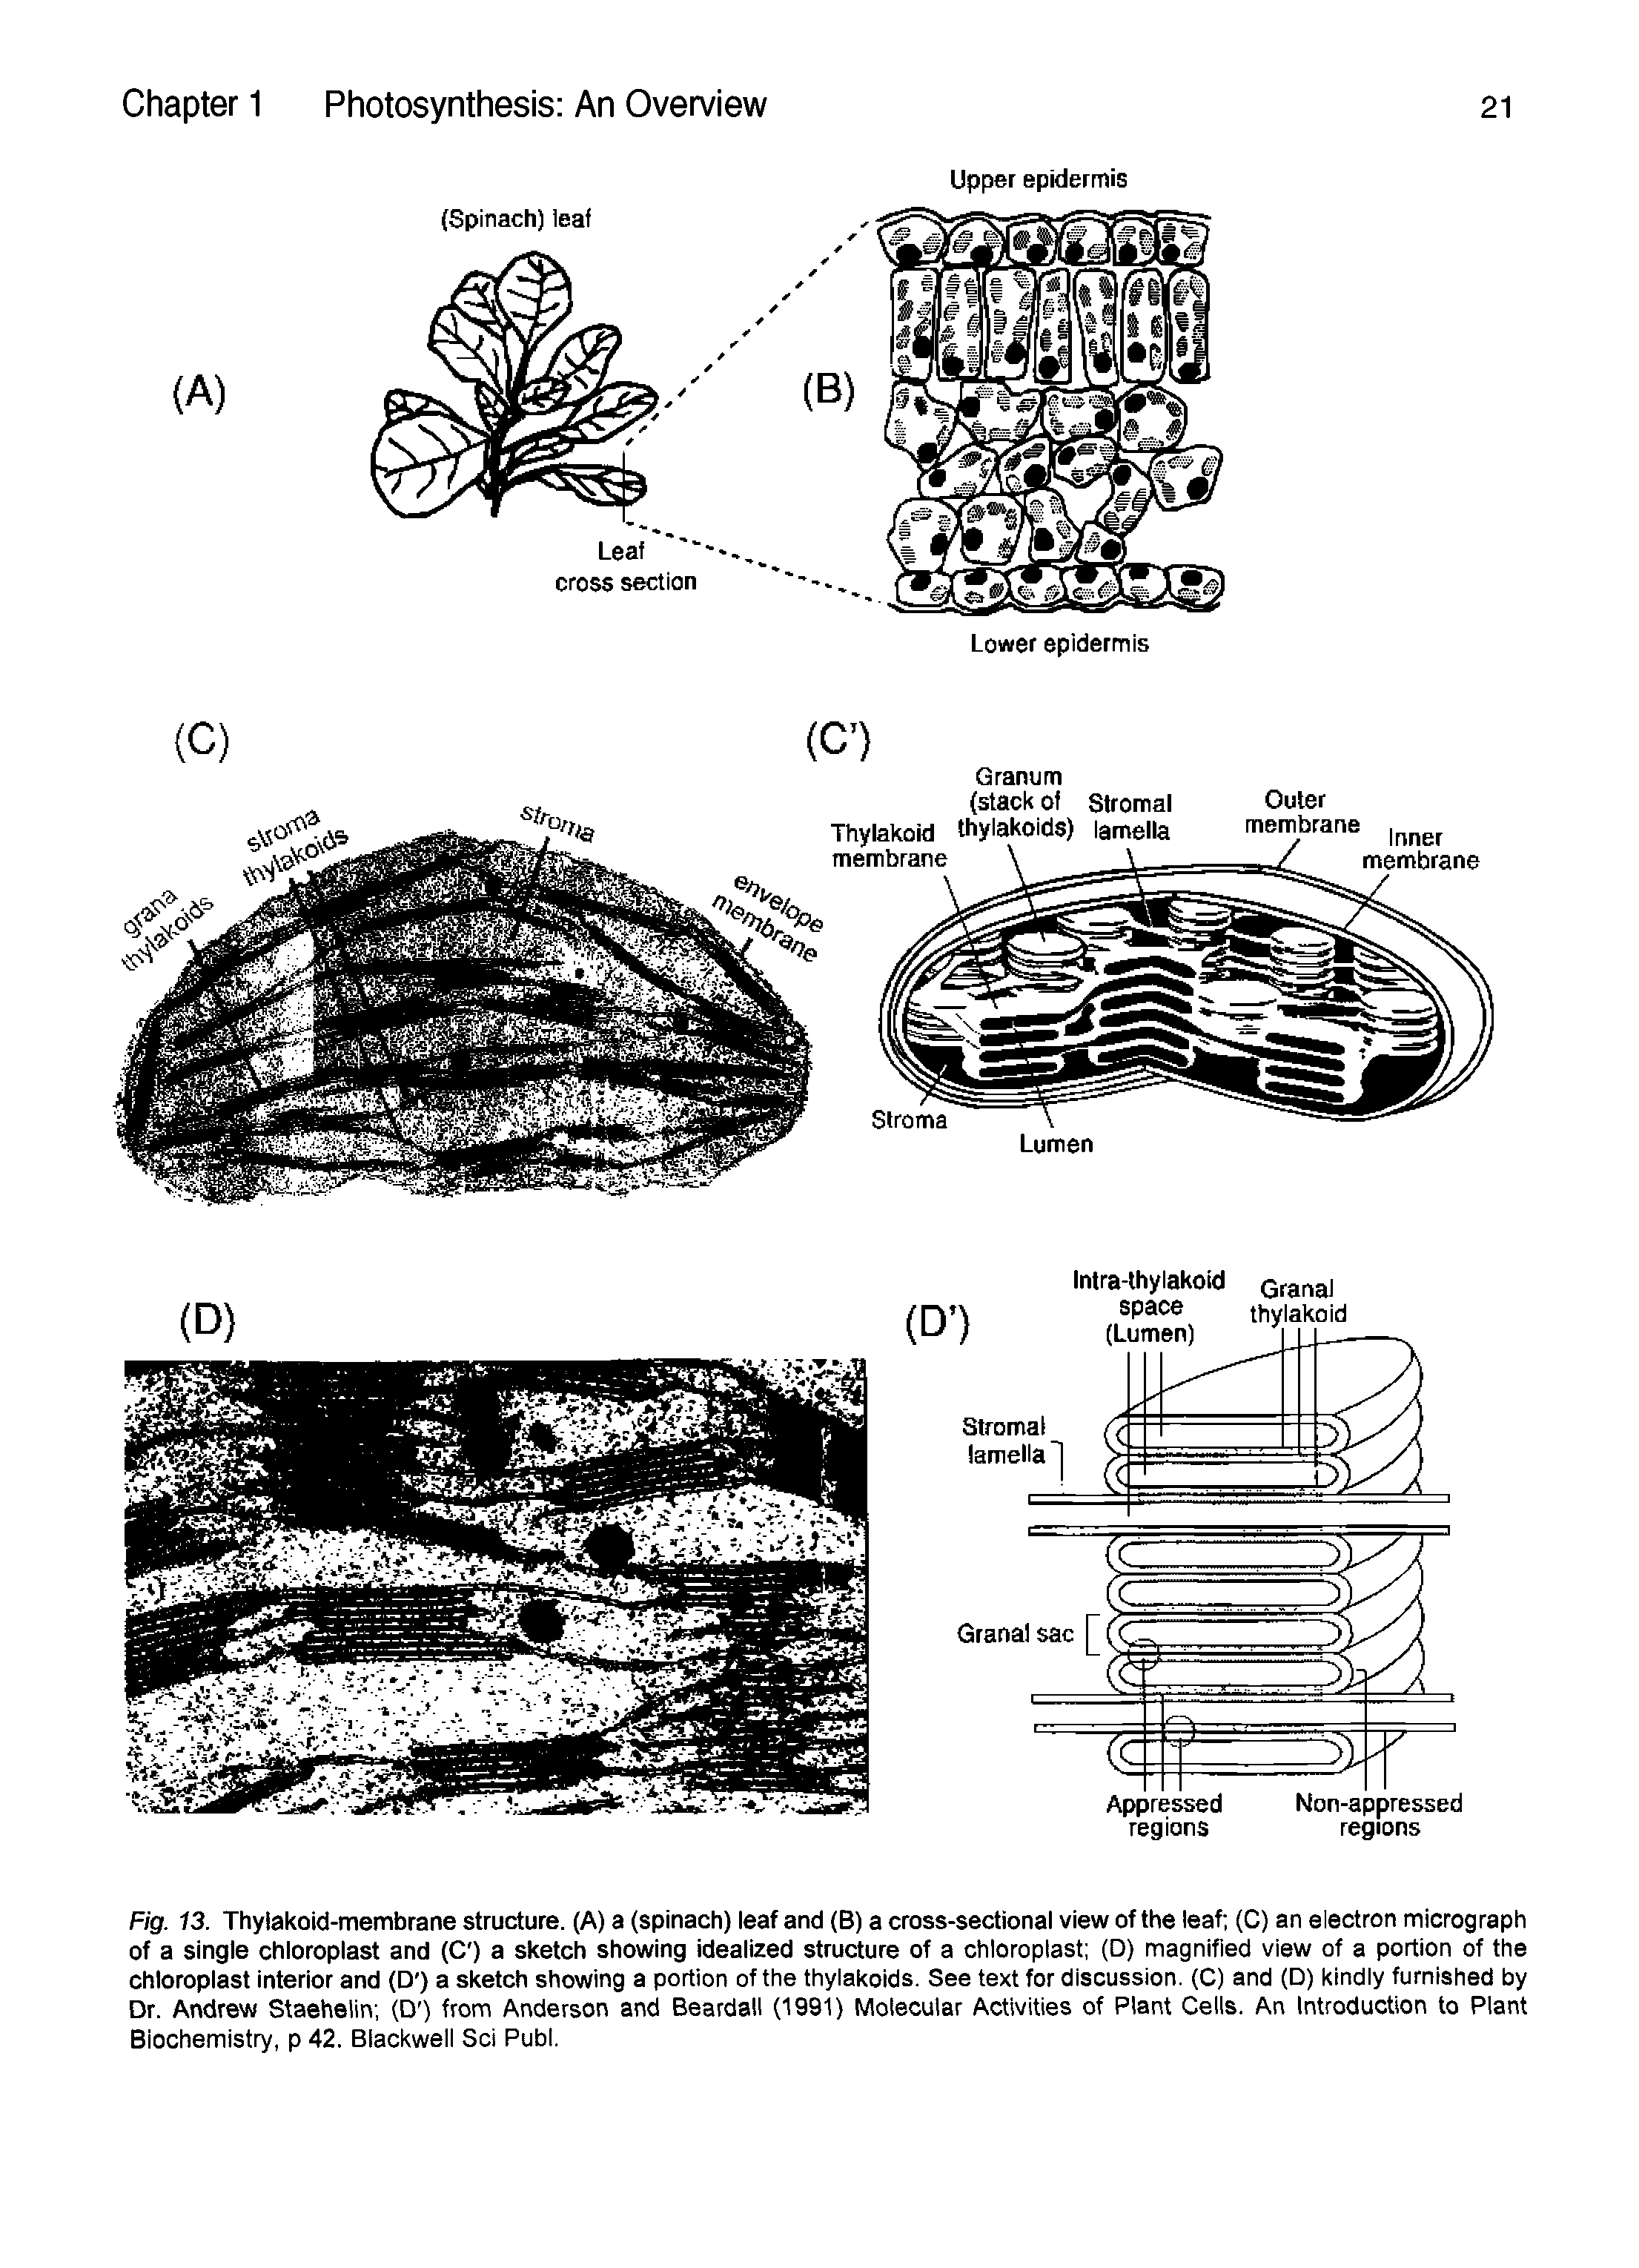 Fig. 13. Thylakoid-membrane structure. (A) a (spinach) leaf and (B) a cross-sectional view of the leaf (C) an electron micrograph of a single chloroplast and (O ) a sketch showing idealized structure of a chloroplast (D) magnified view of a portion of the chloroplast interior and (O ) a sketch showing a portion of the thylakoids. See text for discussion. (C) and (D) kindly furnished by Dr. Andrew Staehelin (D ) from Anderson and Beardall (1991) Molecular Activities of Plant Cells. An Introduction to Plant Biochemistry, p 42. Blackwell Sci Publ.